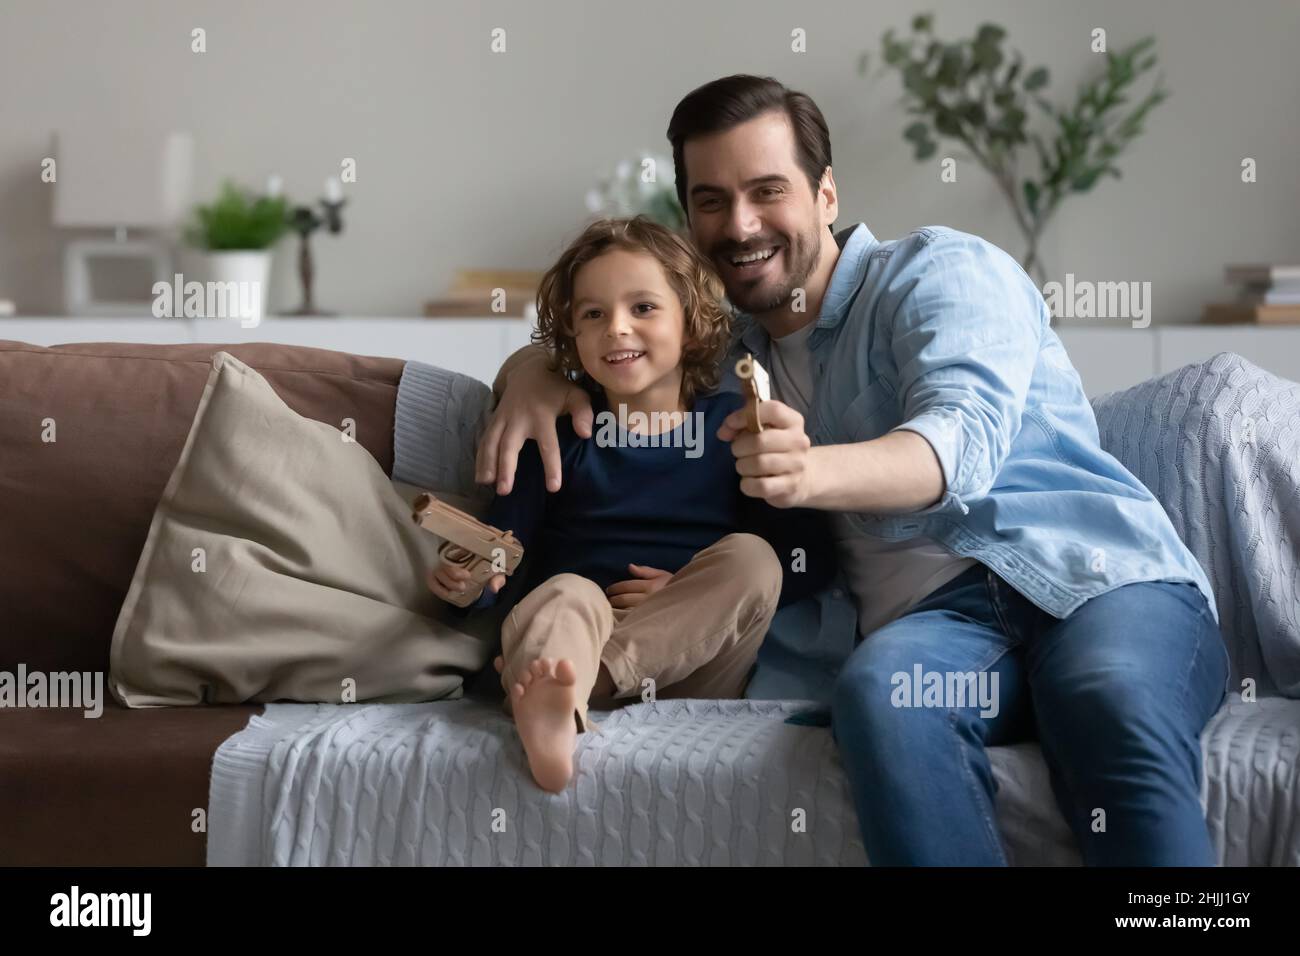 Father and son play toy guns shooting at home Stock Photo